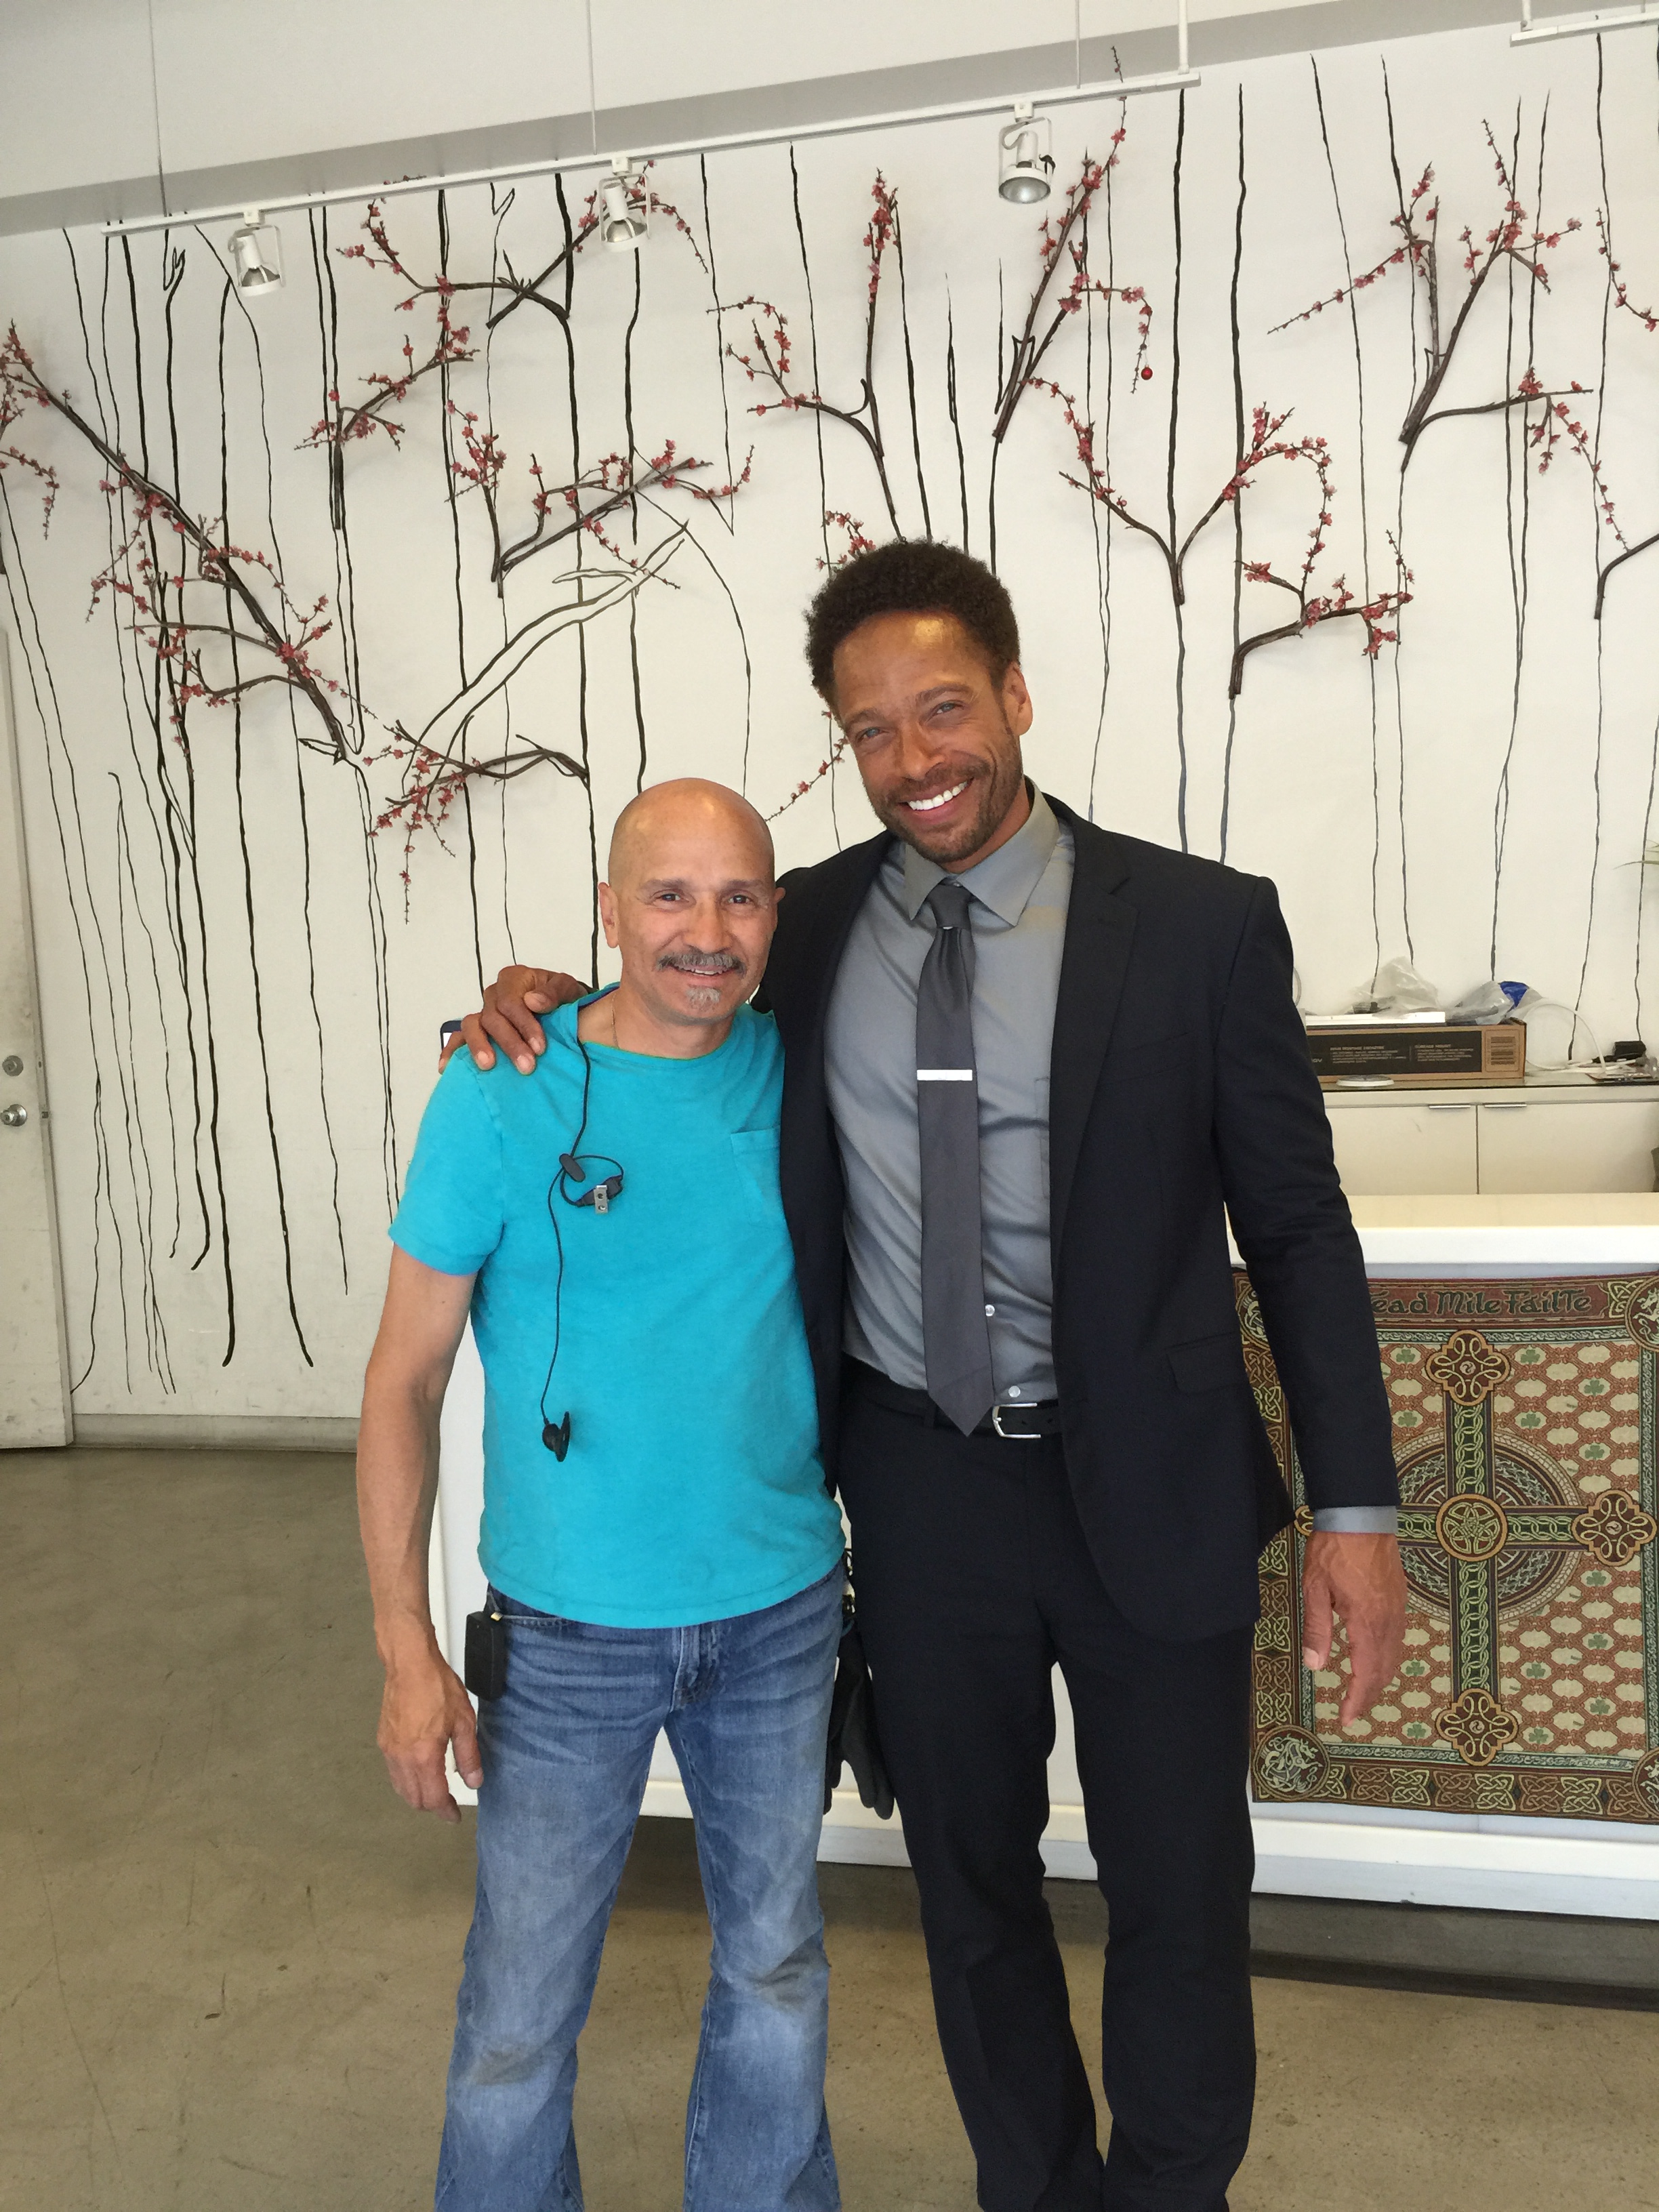 On set of the film Sophie with Gary Dourdan